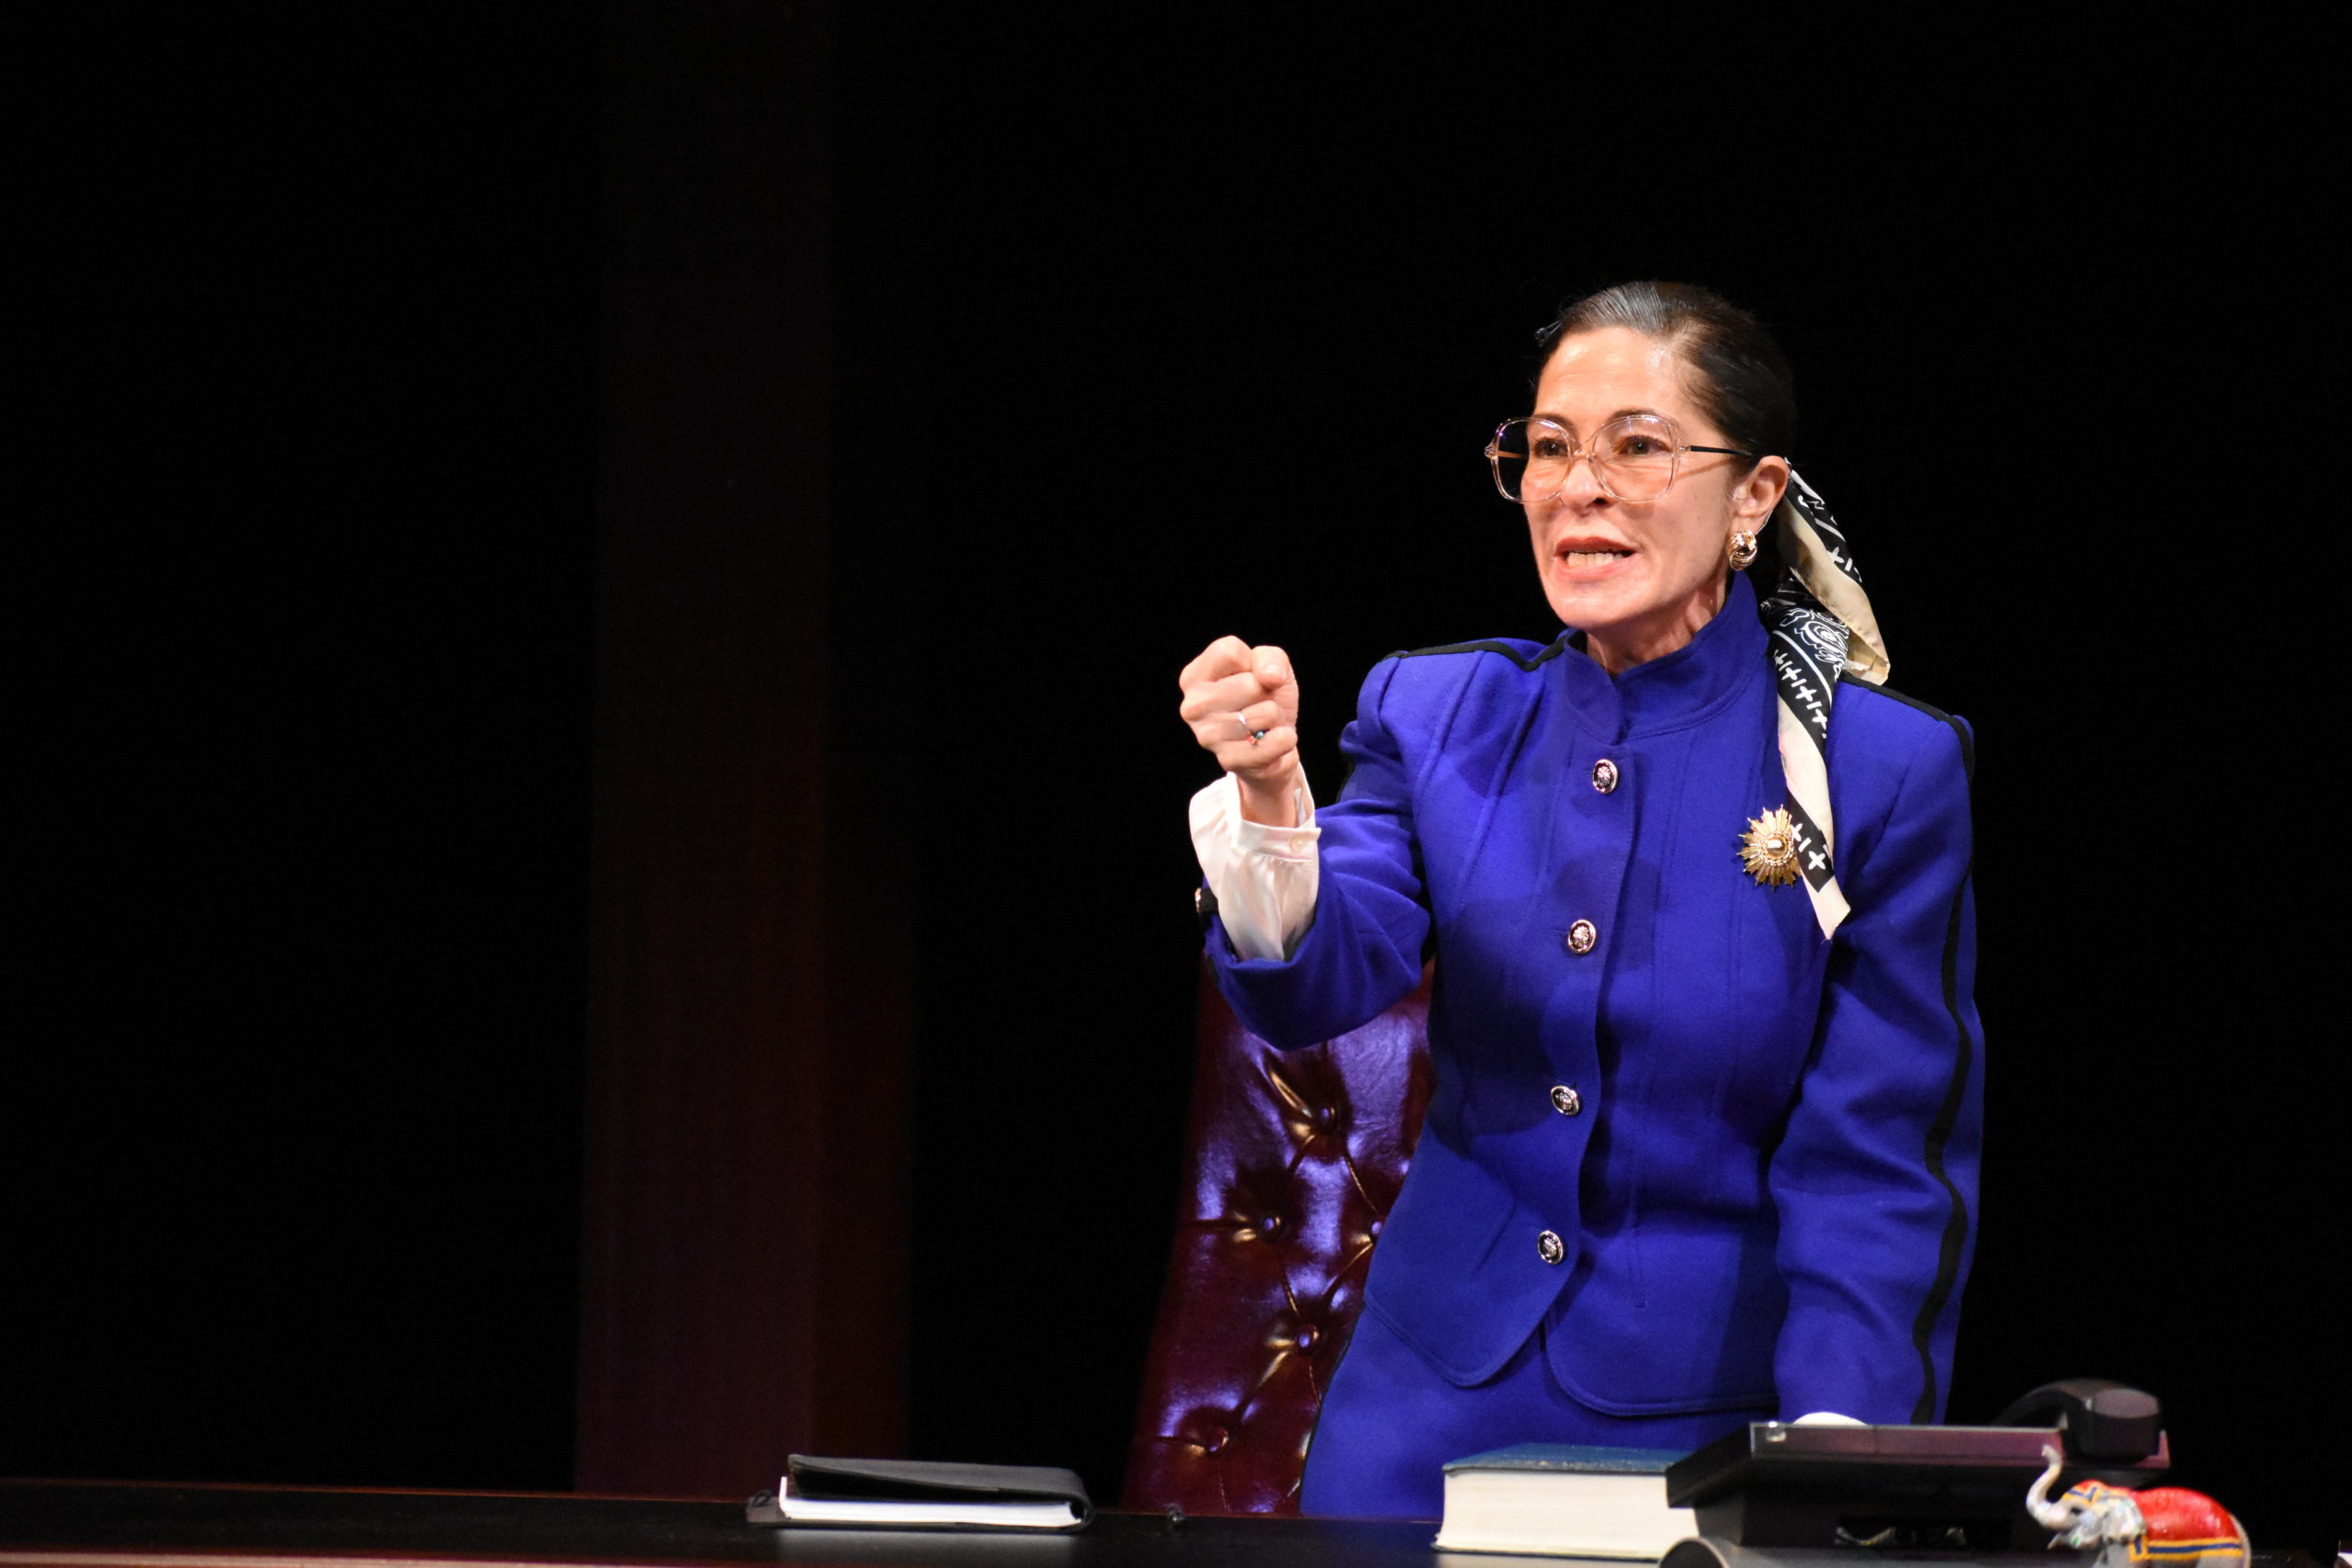 Michelle Azar as Ruth Bader Ginsburg in "All Things Equal" at Bay Street Theater